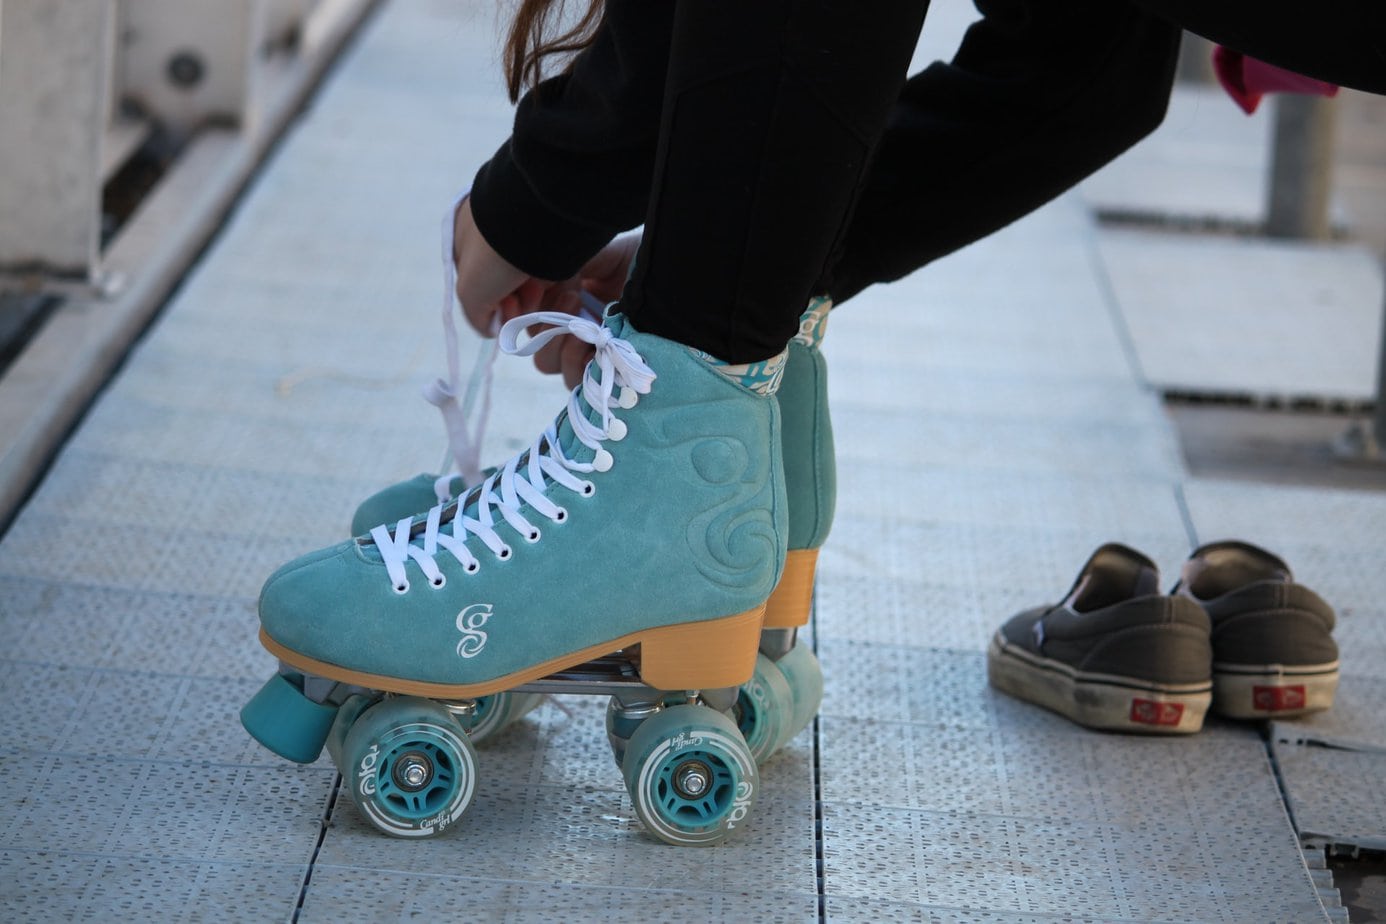 Roller skating is the new trend this summer! How to get started?